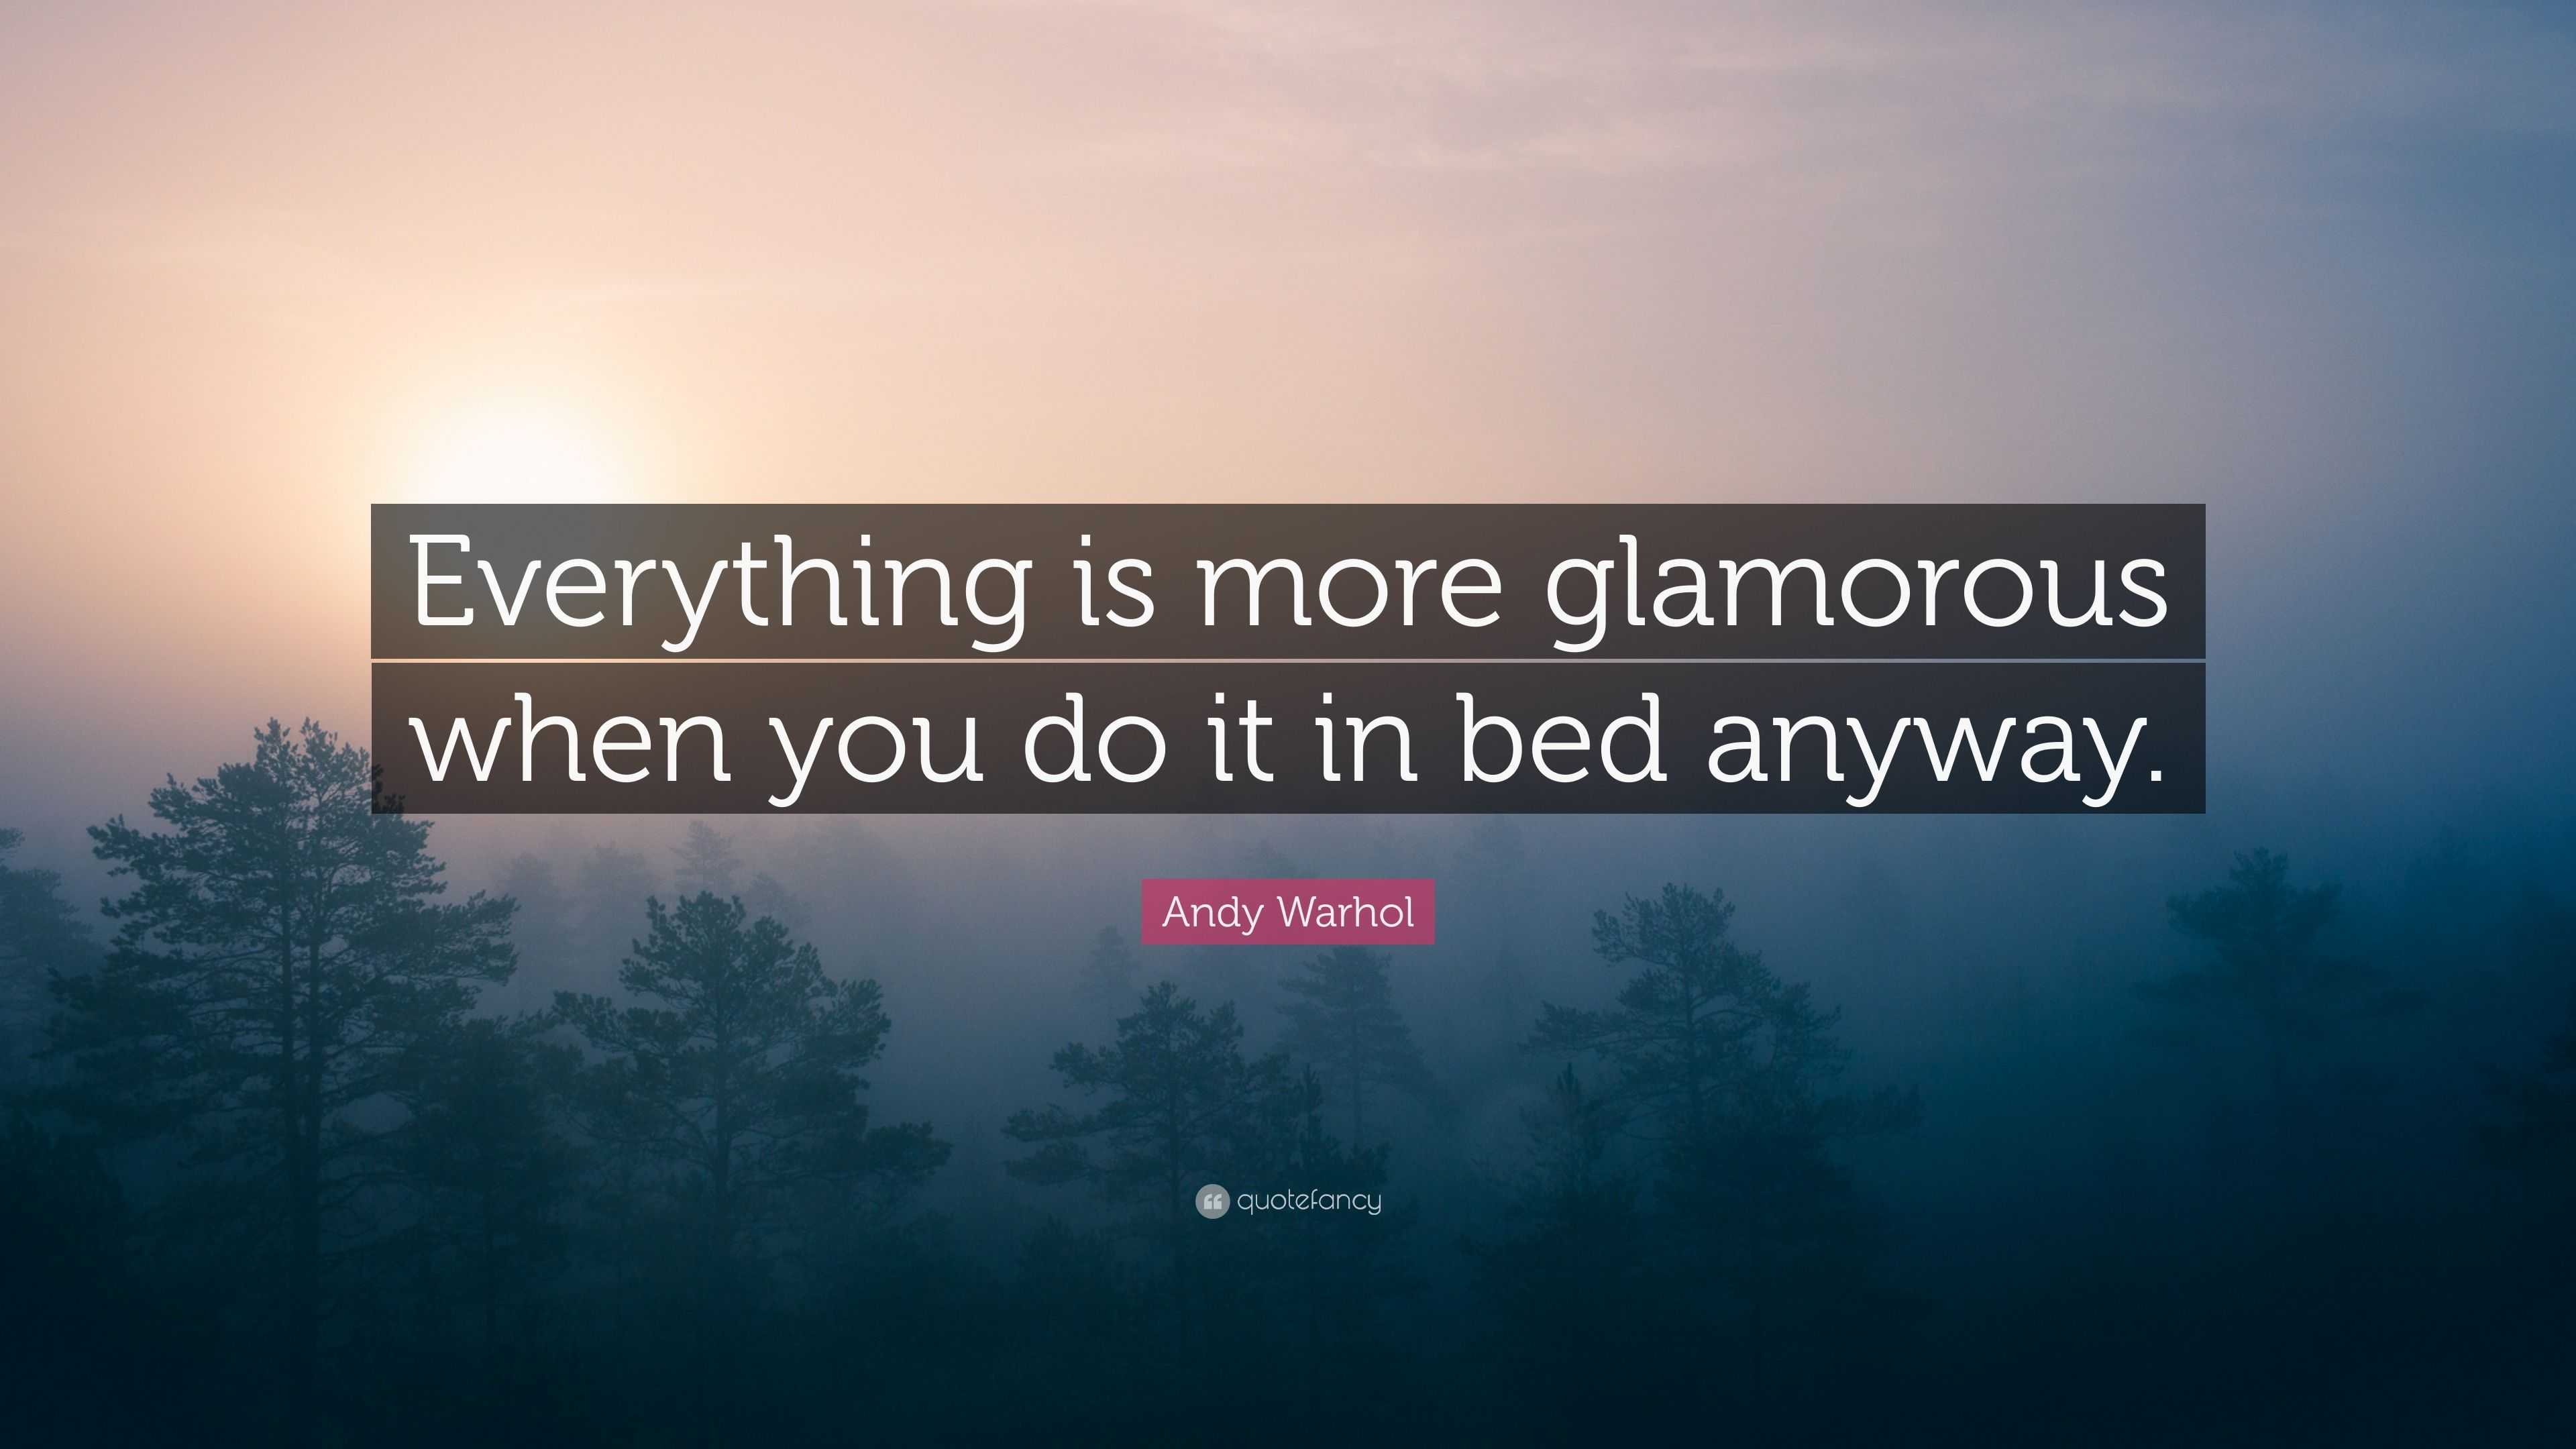 Andy Warhol Quote: “Everything is more glamorous when you do it in